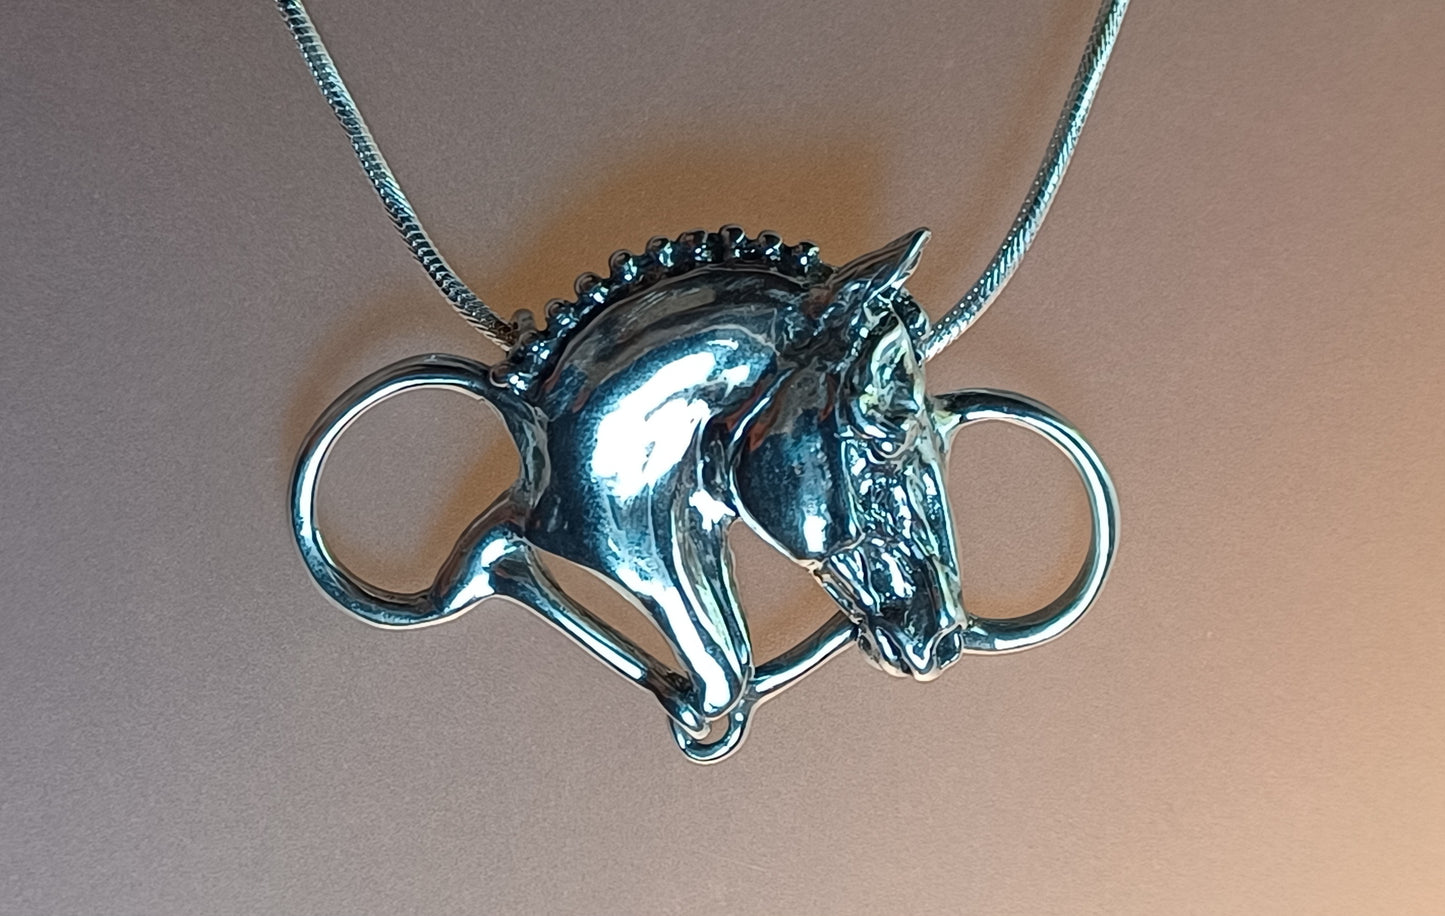 Dressage Horse and Snaffle Bit Pendant and Chain Sterling Silver.  Forge Hill Sculpture